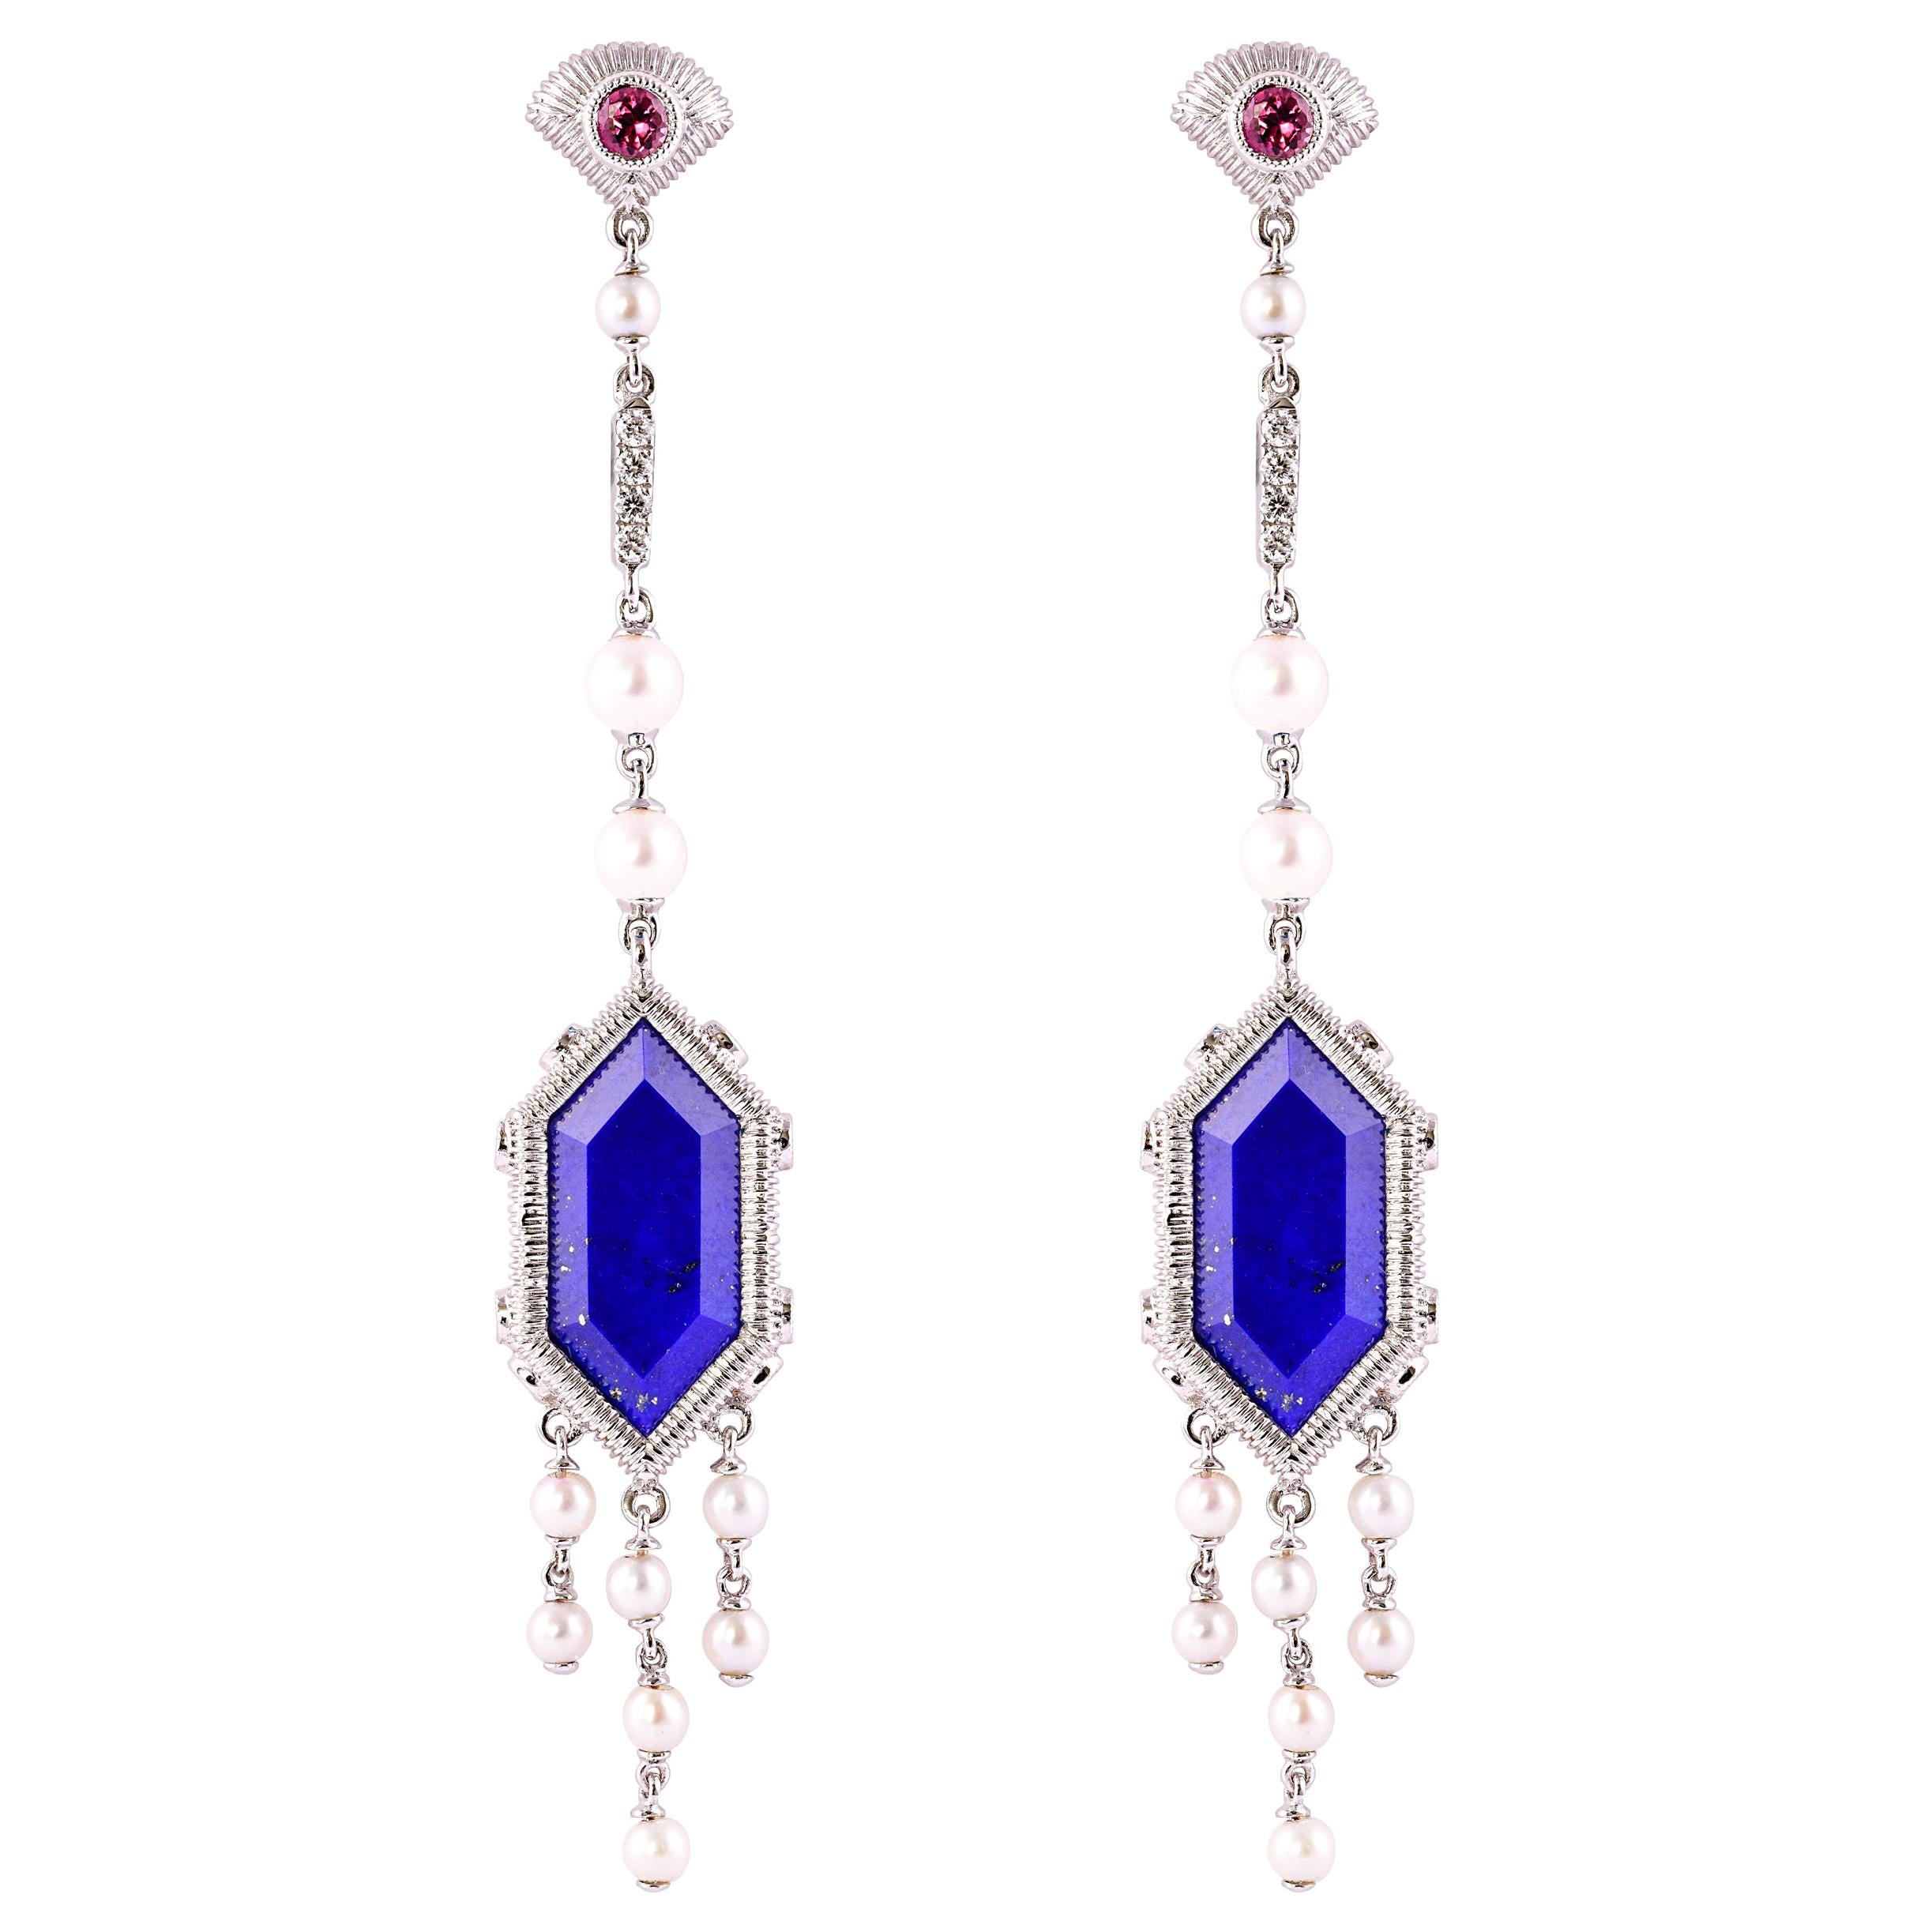 17.1 Carat Lapis Lazuli Earring in 18 Karat White Gold with Diamonds and Pearls